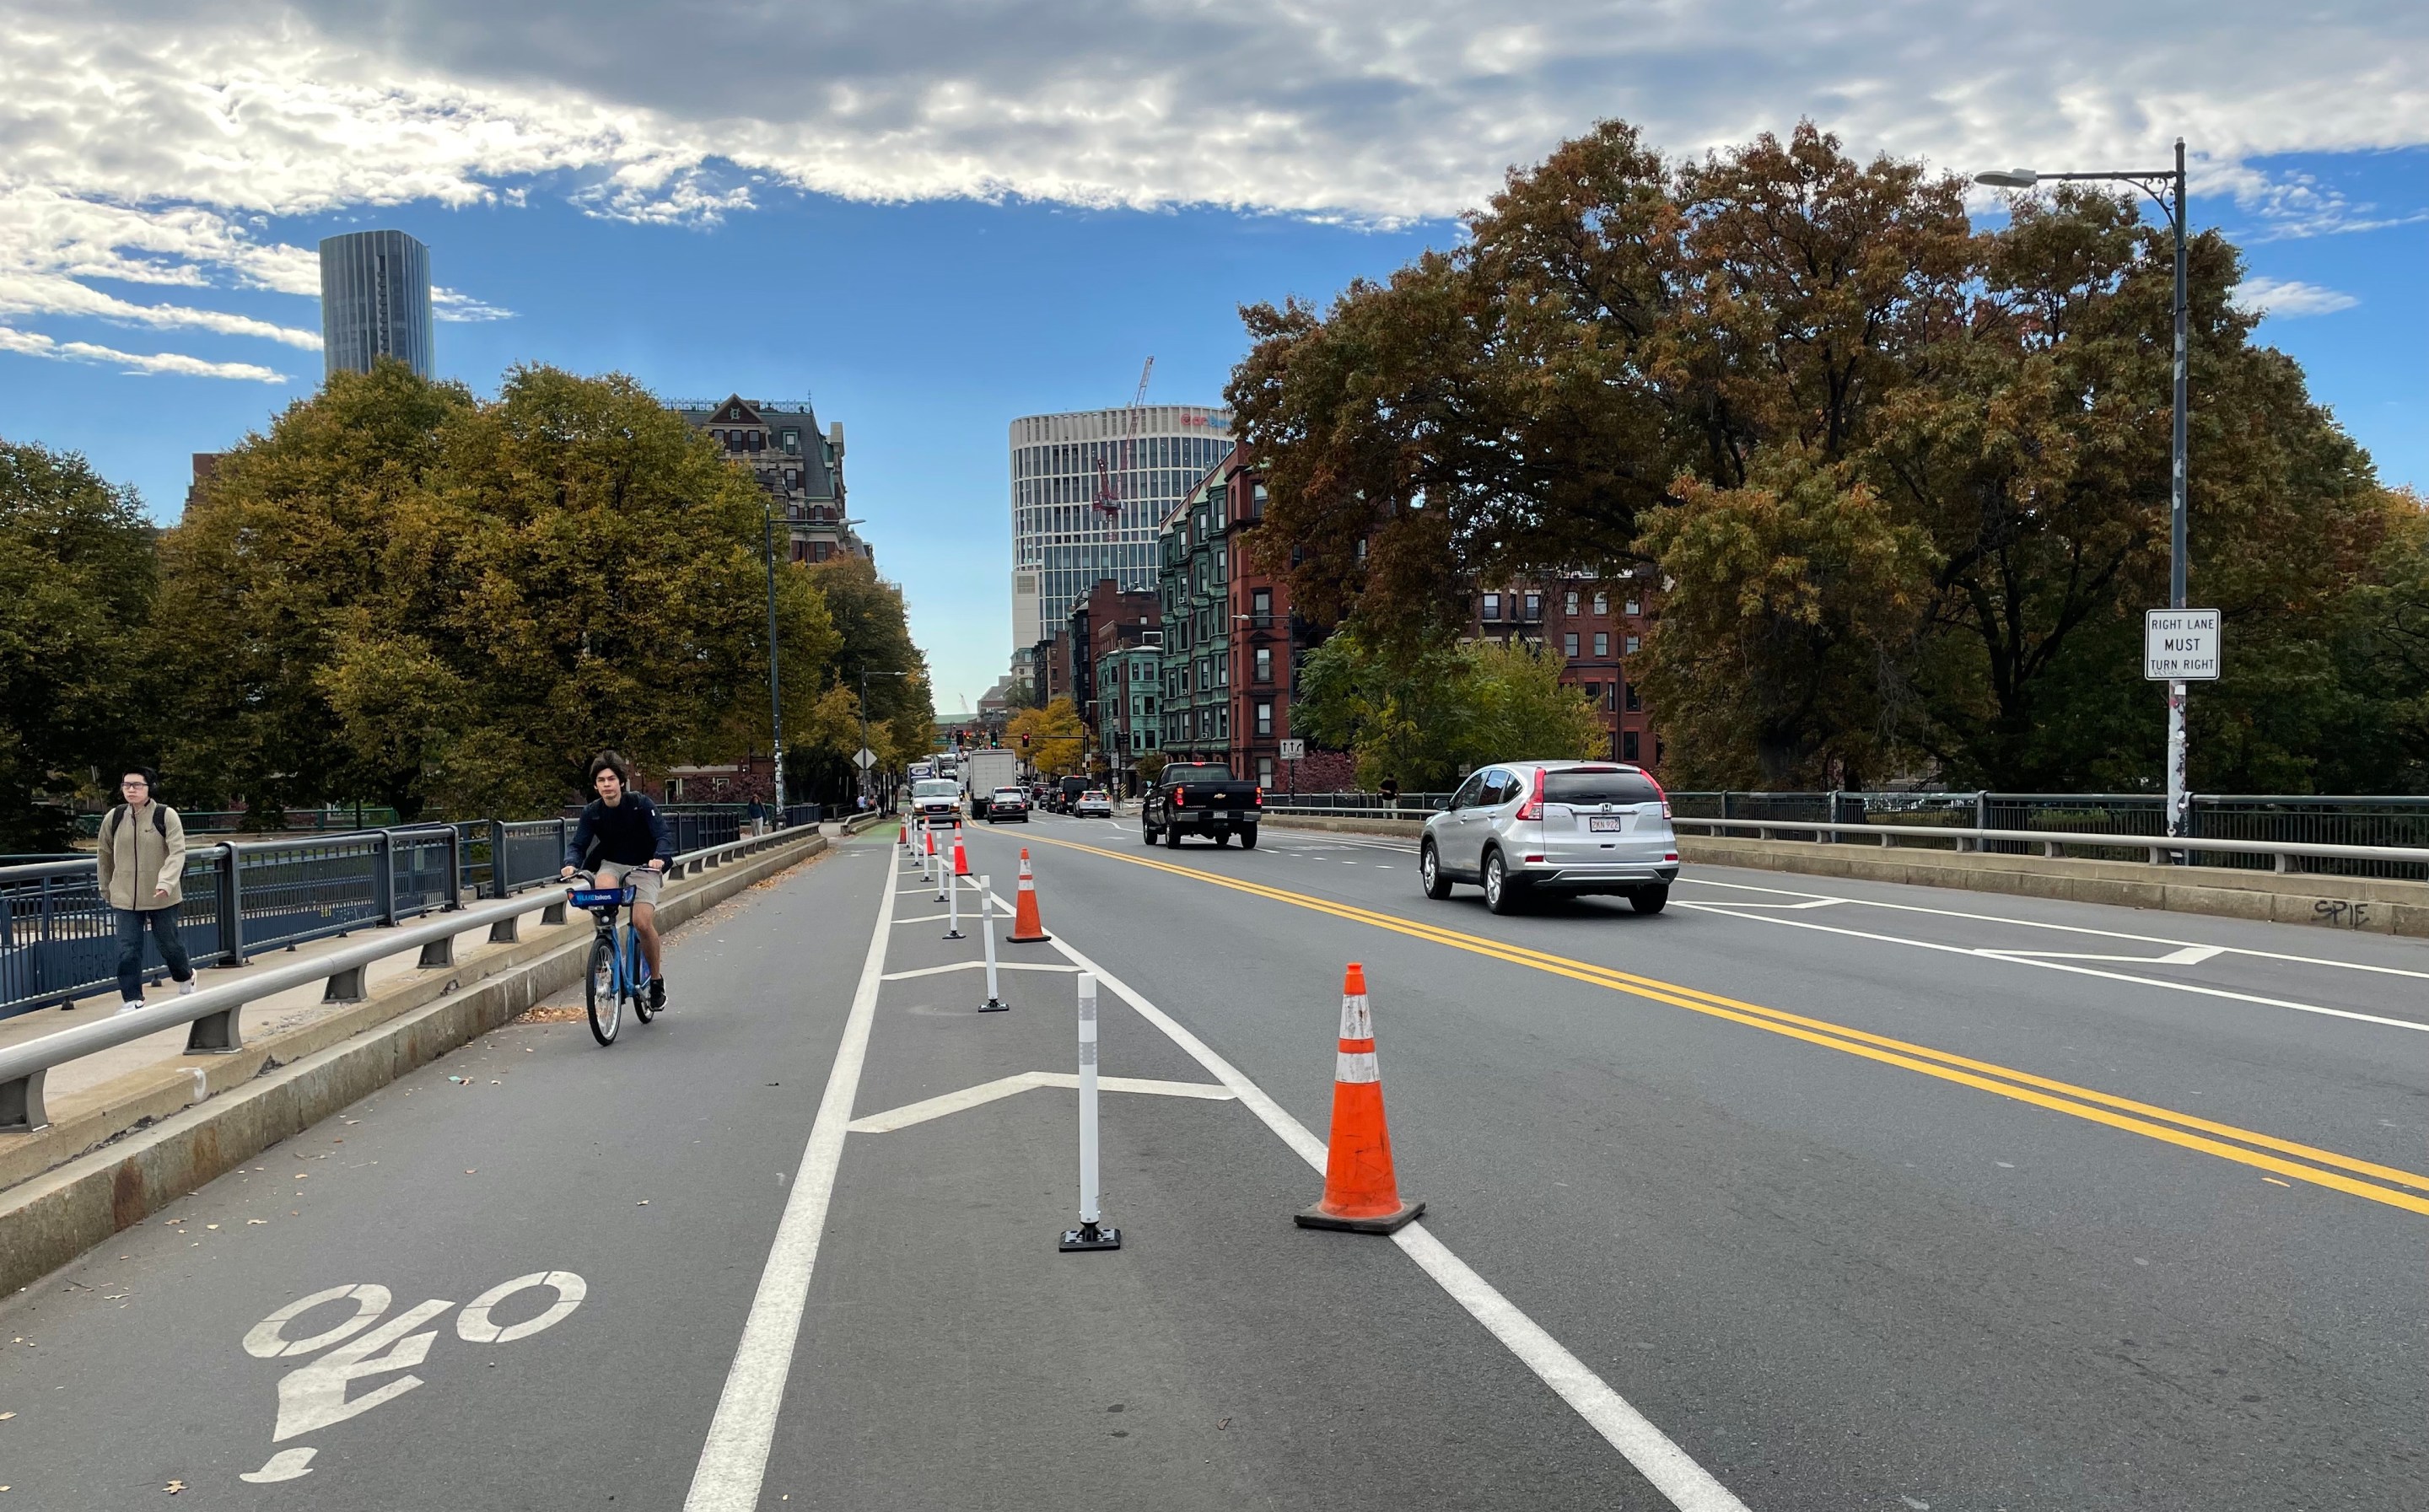 A photograph of a bridge with a bike lane at left, and a man riding a bike toward the camera, and two car lanes to the right. A column of white flexible-post bollards with a handful of orange construction cones occupies the buffer zone between the bike lane and the car lanes. In the distance, at the end of the bridge, are some trees and the tall buildings of the Boston skyline.